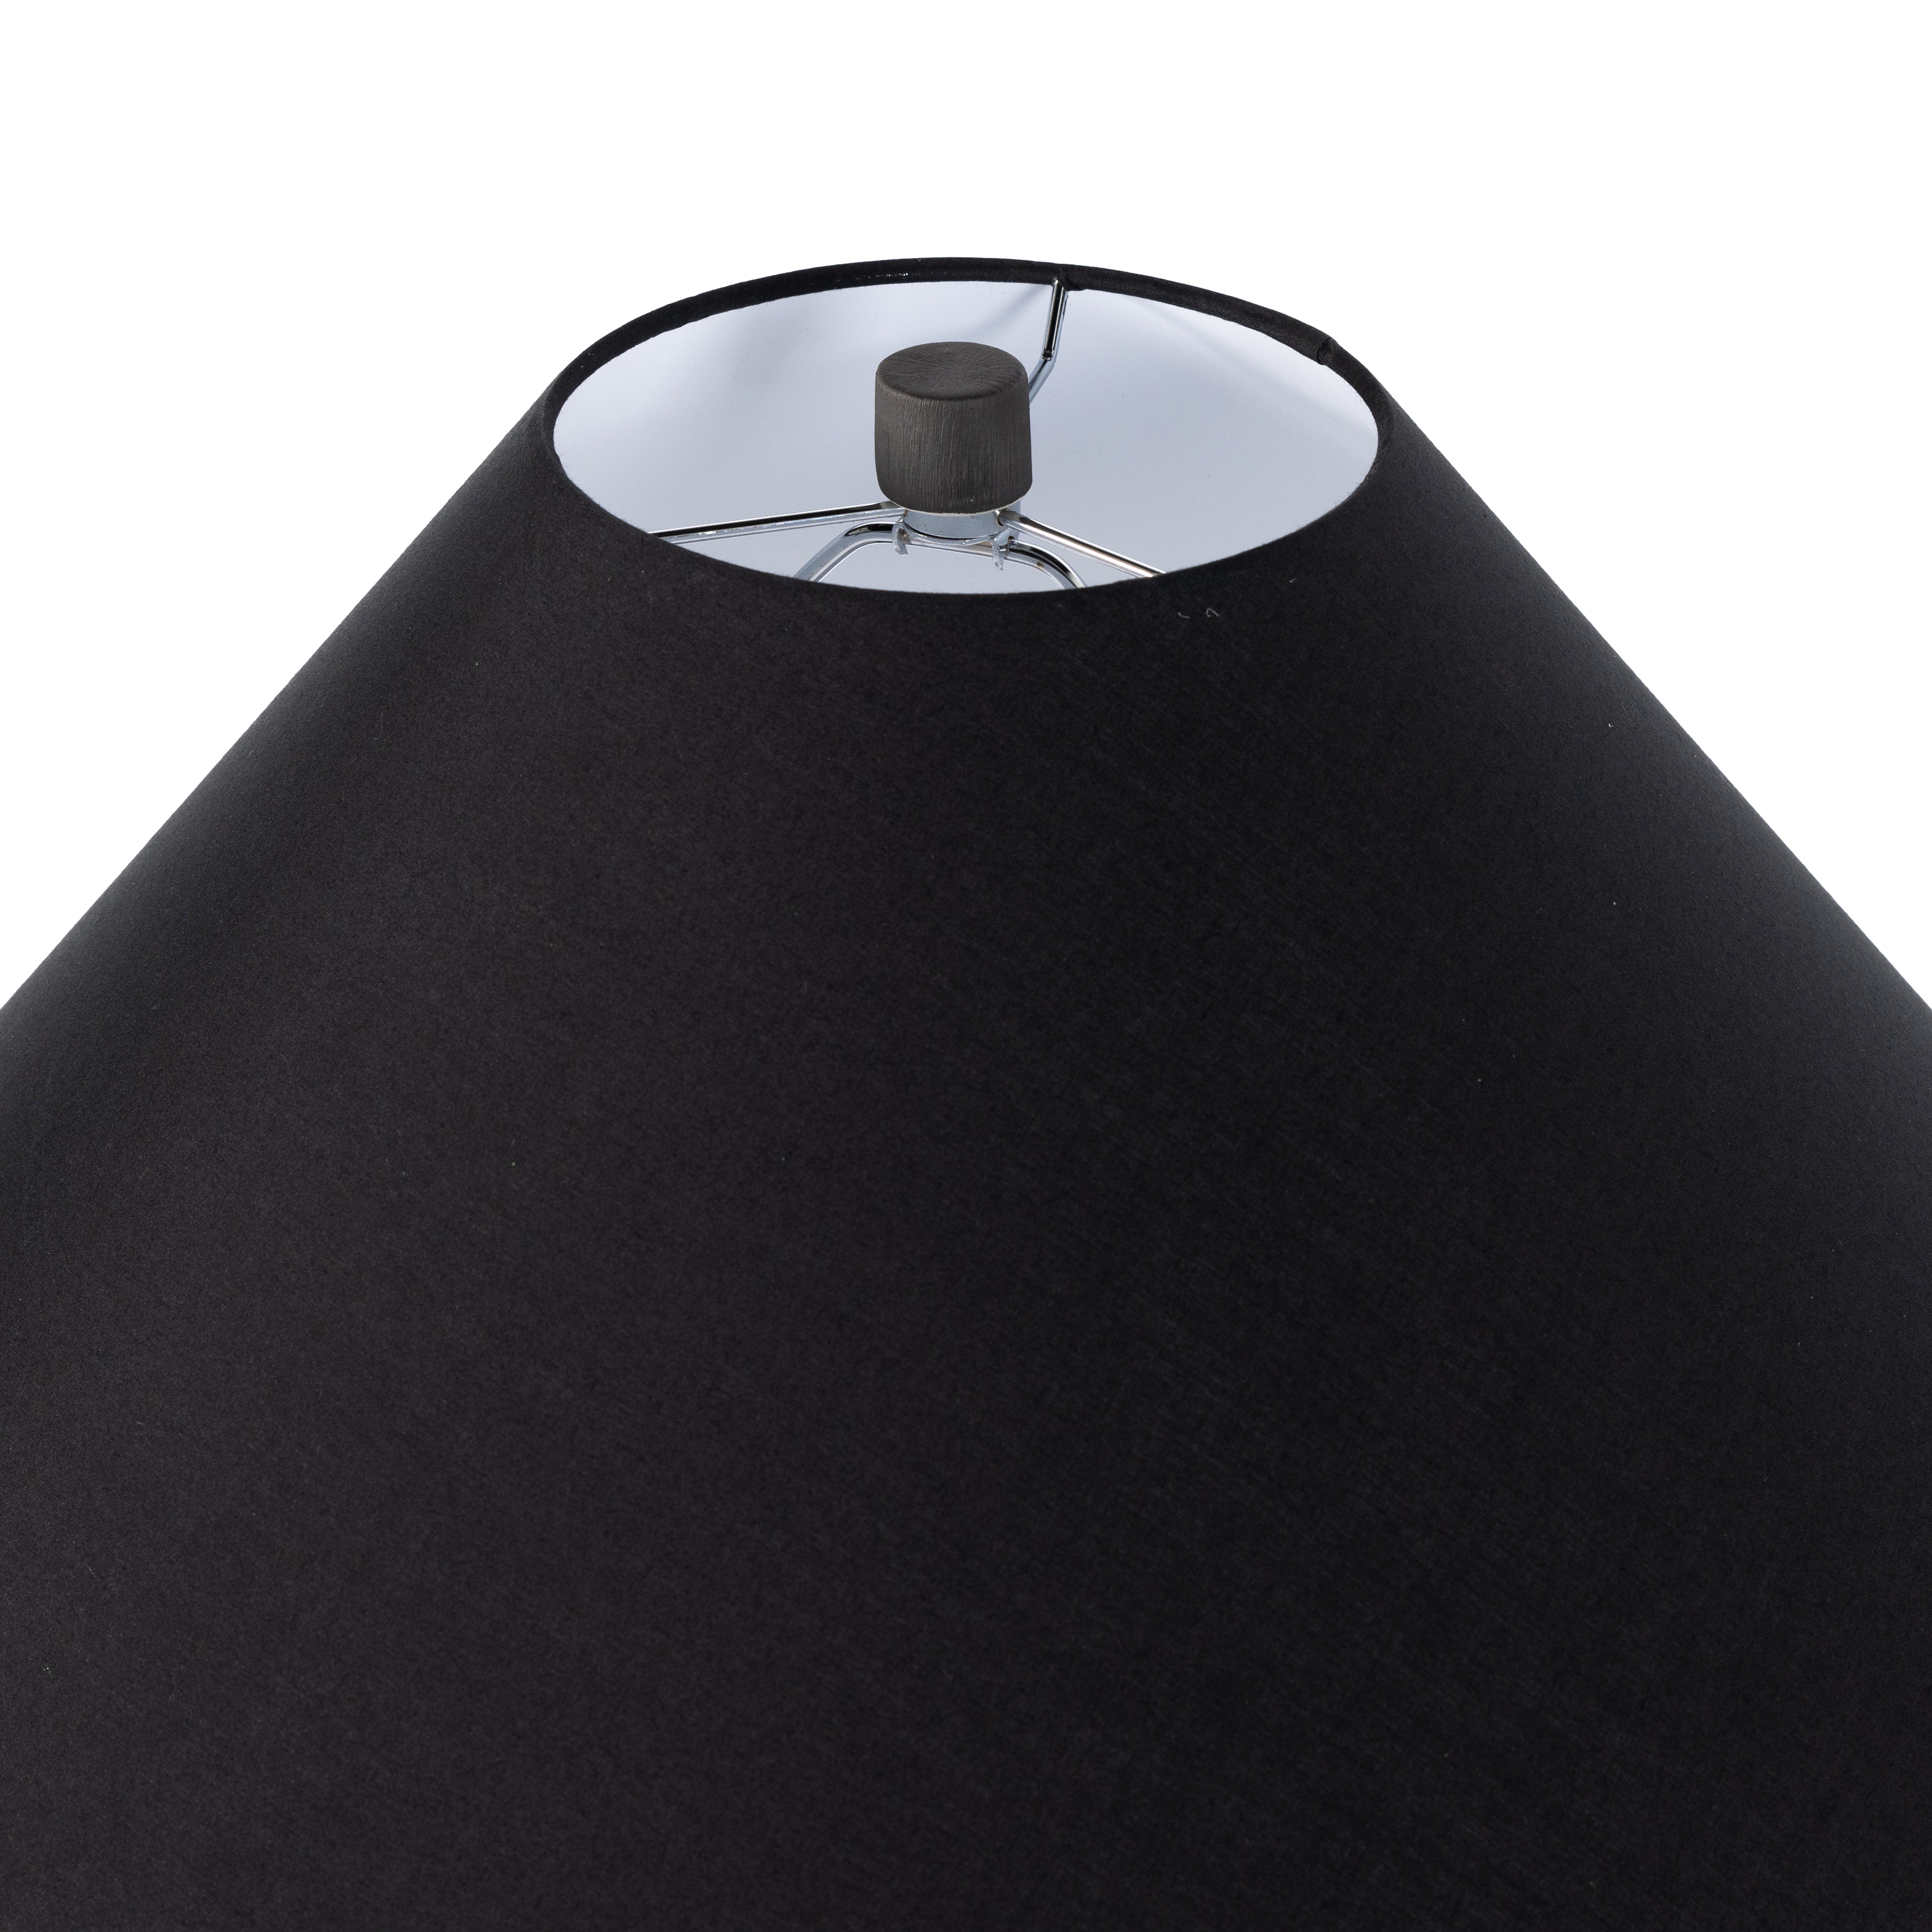 Muji Black Cotton Table Lamp is a hand-shaped black talavera lamp with handle-like detailing pairs with a tapered cotton shade in black. Amethyst Home provides interior design services, furniture, rugs, and lighting in the Dallas metro area.